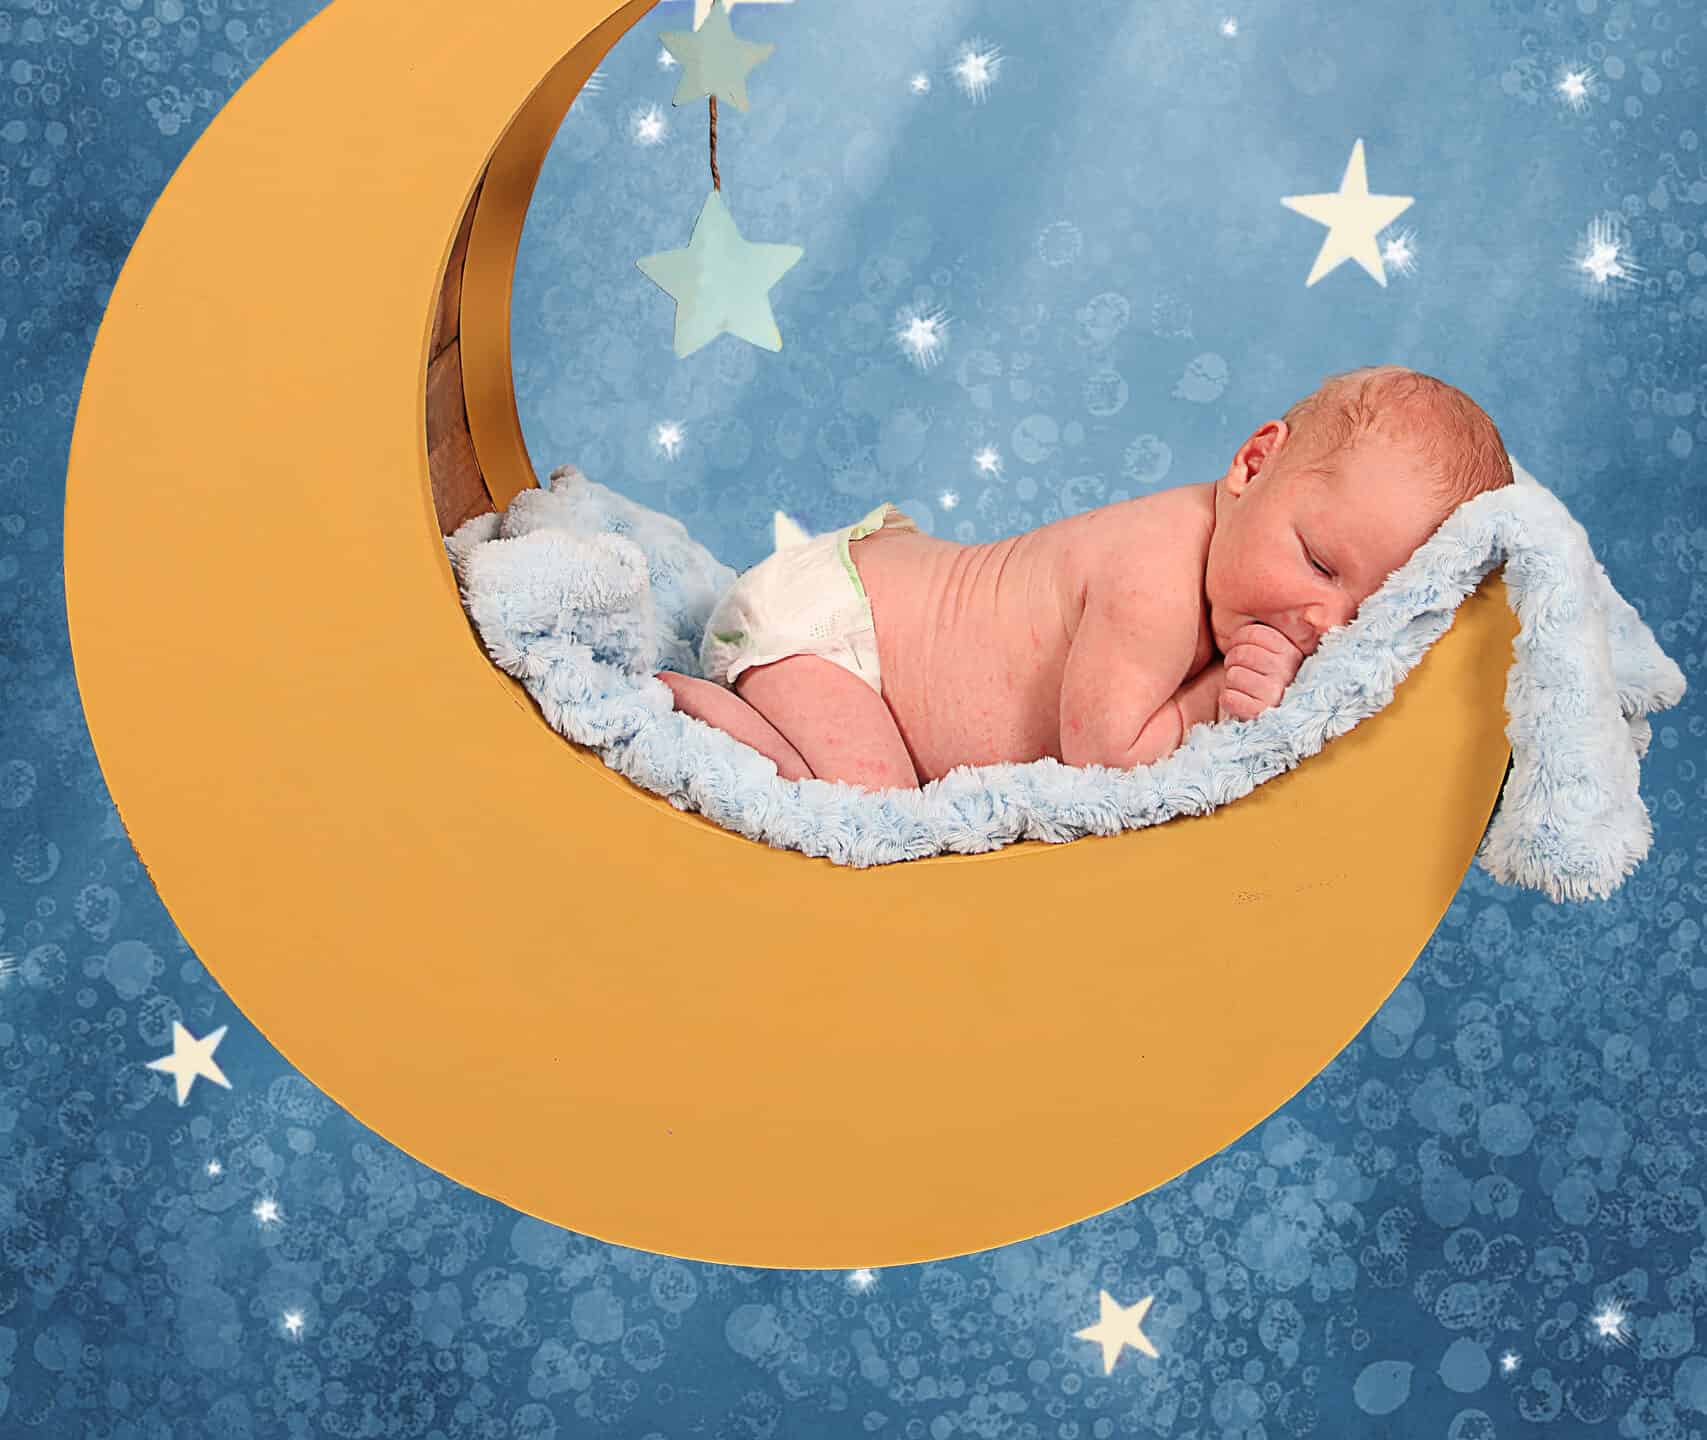 Sweet little baby boy Sleeping in the moon and stars